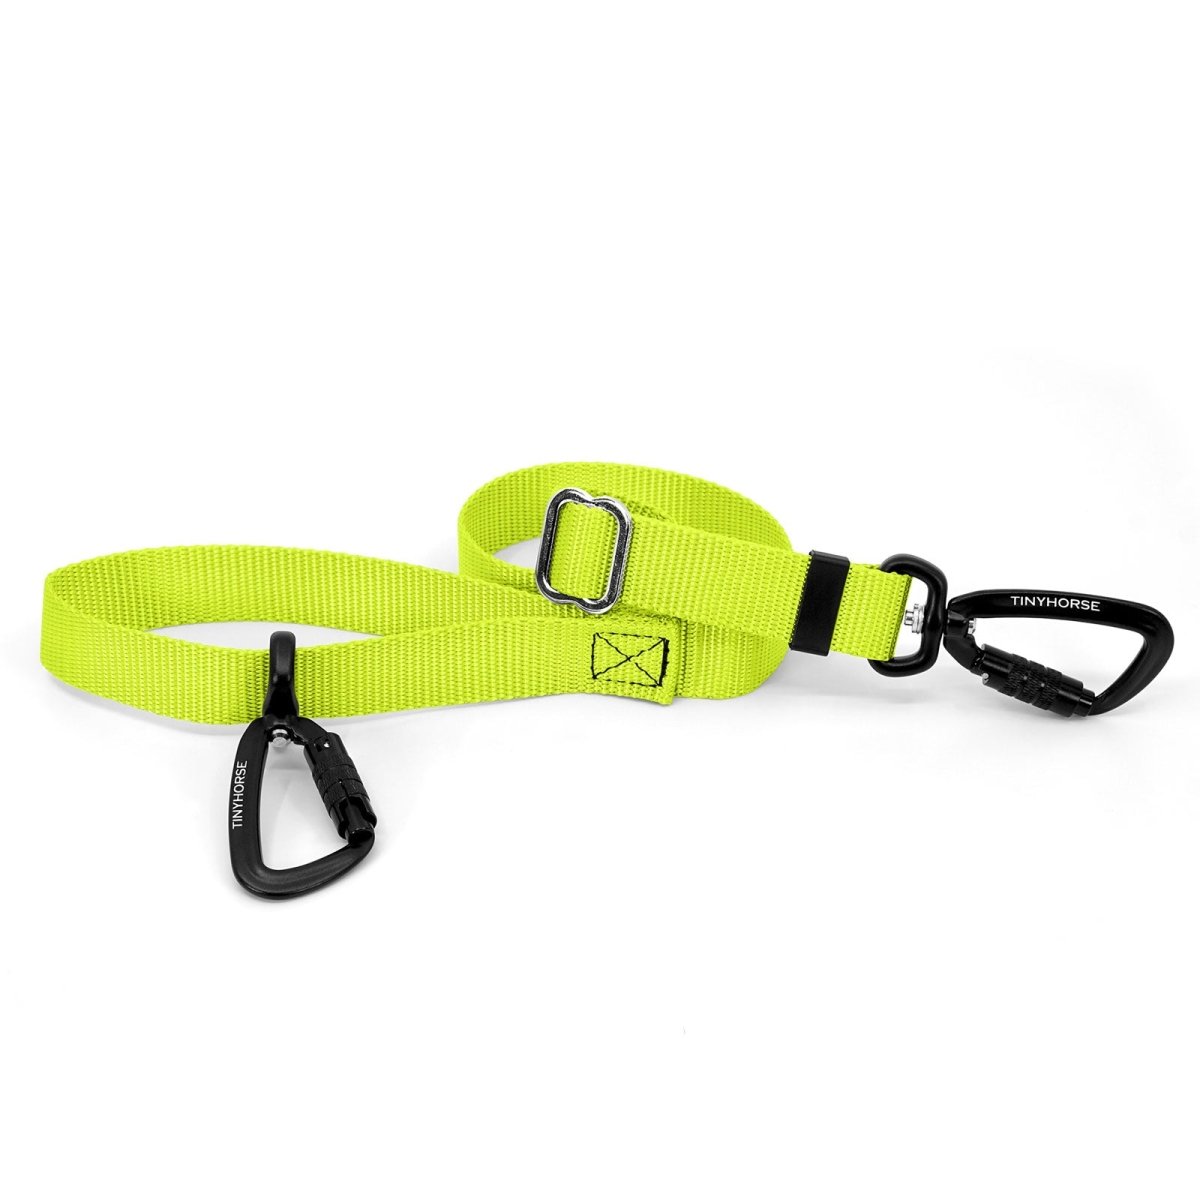 A neon yellow-coloured Lead-All Lite with an adjustable nylon webbing leash and 2 auto-locking carabiners